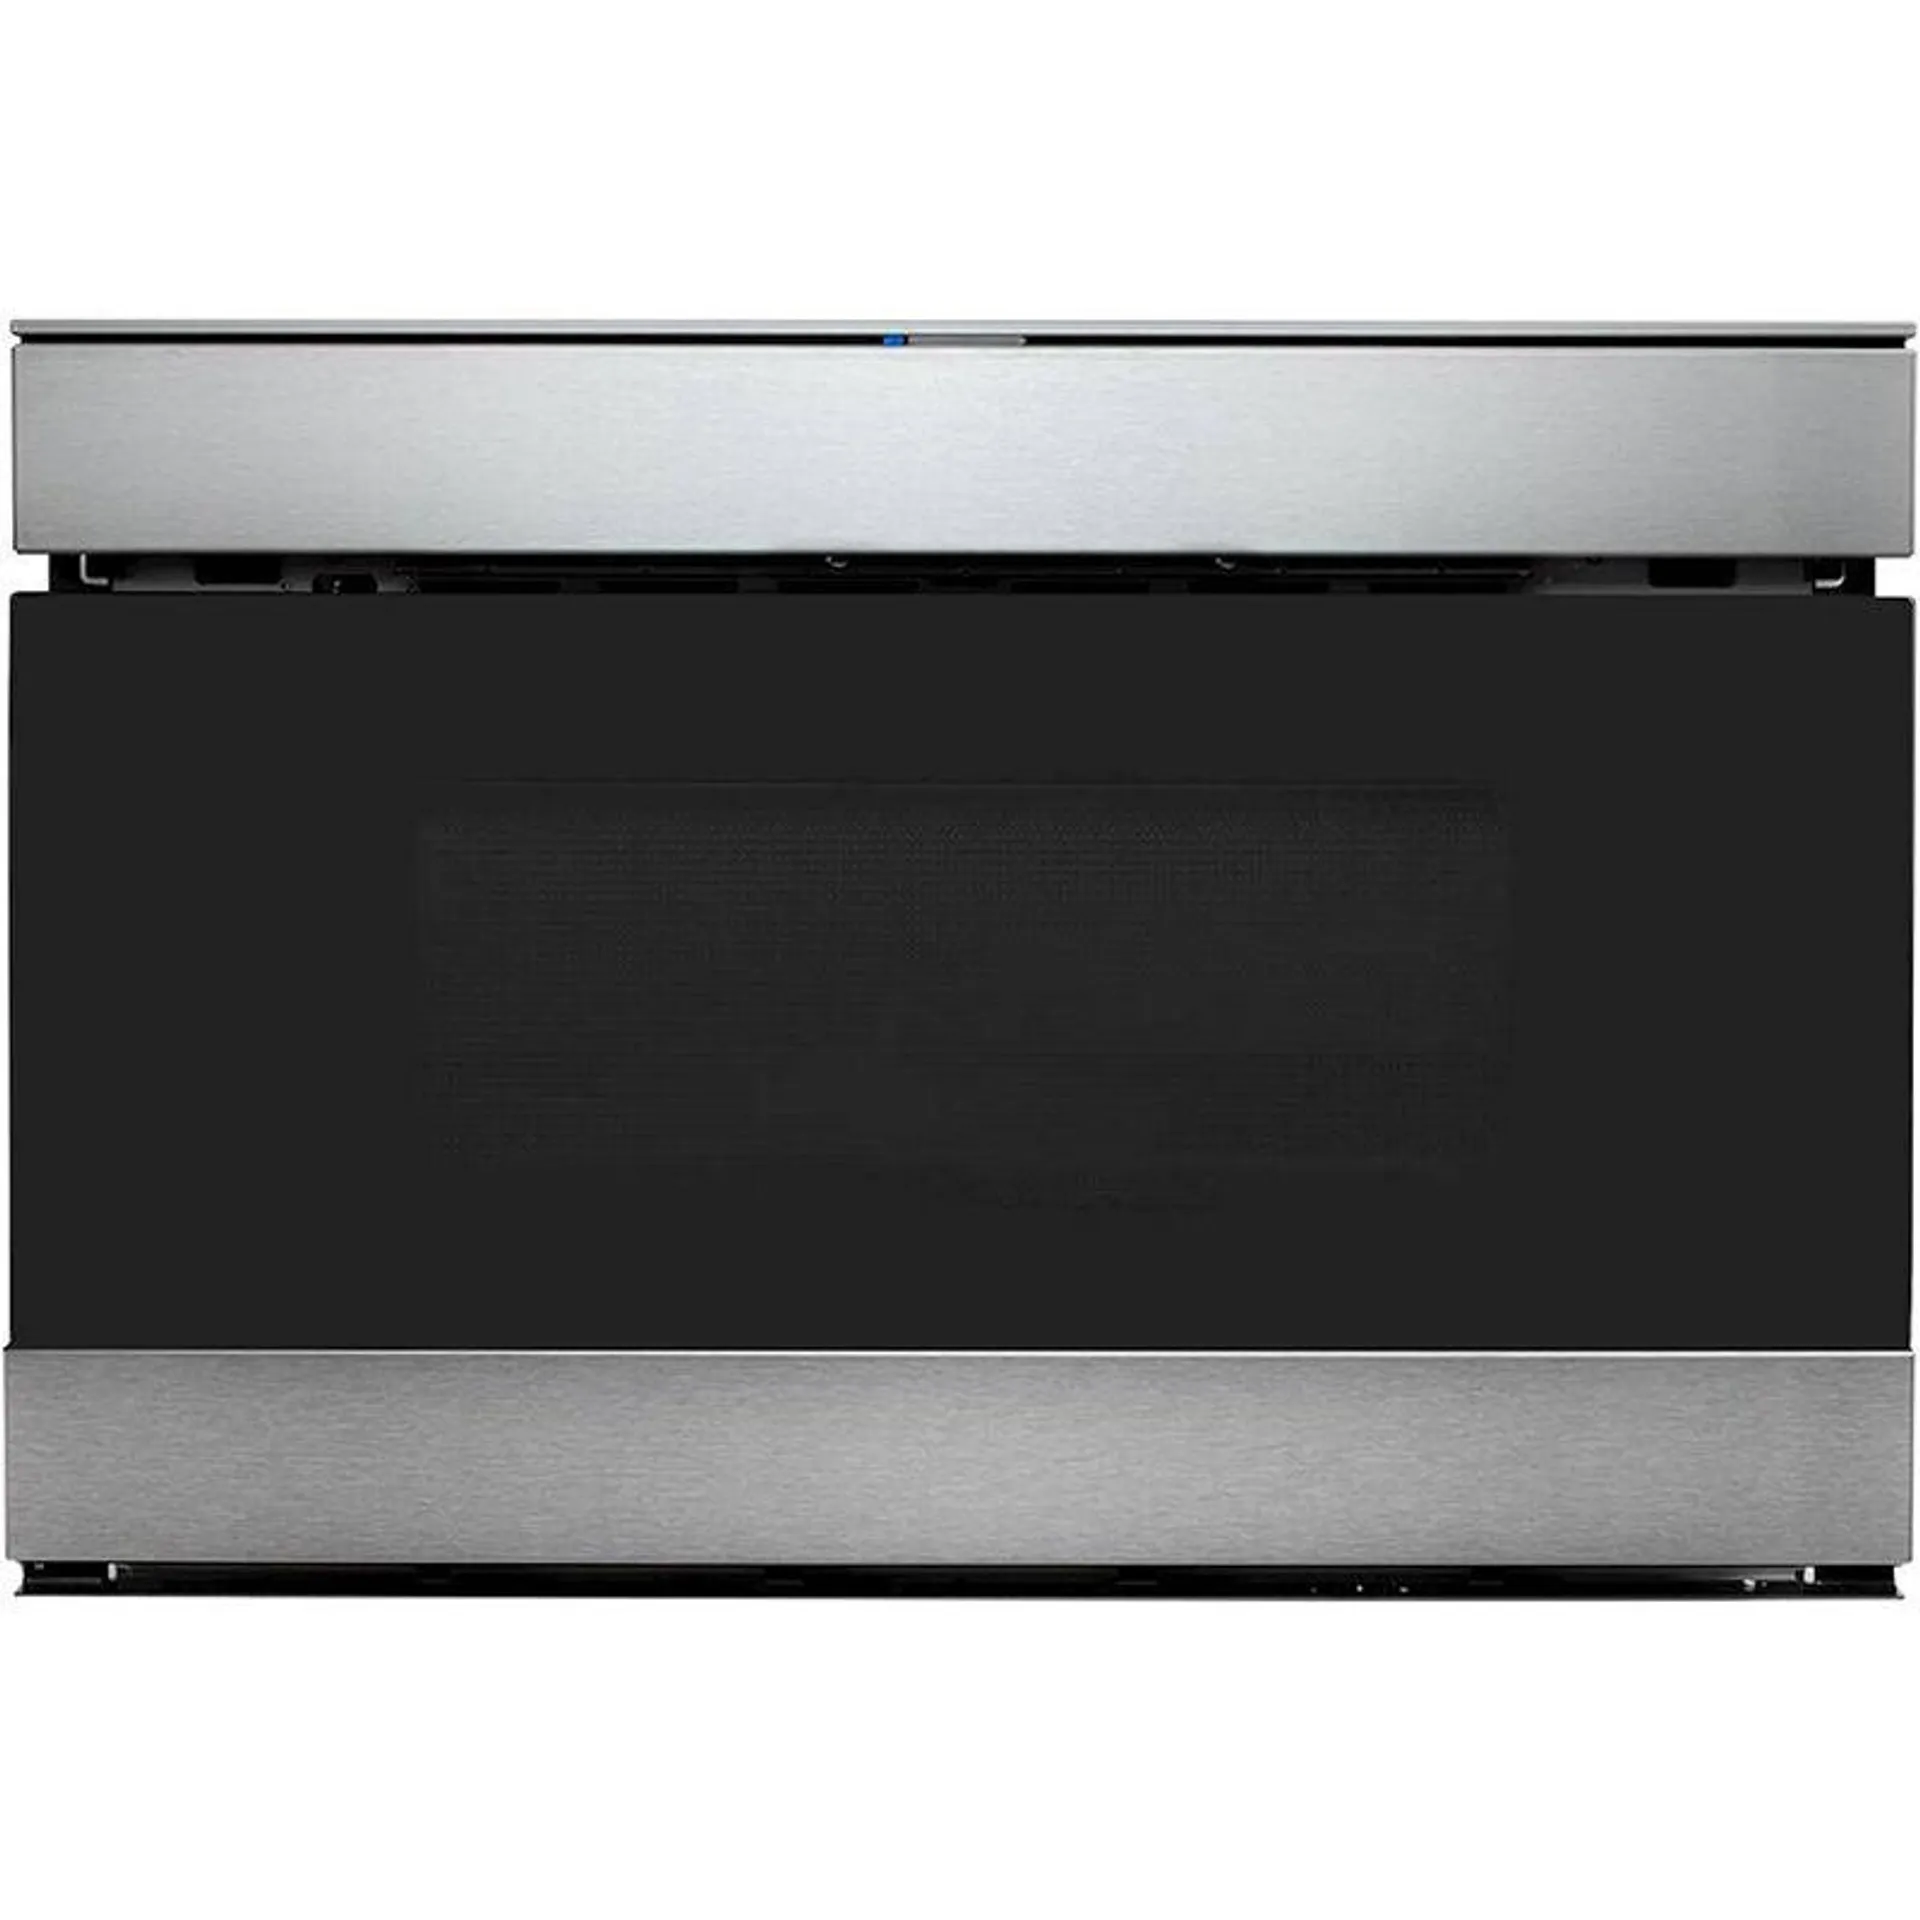 Sharp 24" 1.2 Cu. Ft. Built-In Microwave with 11 Power Levels & Sensor Cooking Controls - Stainless Steel